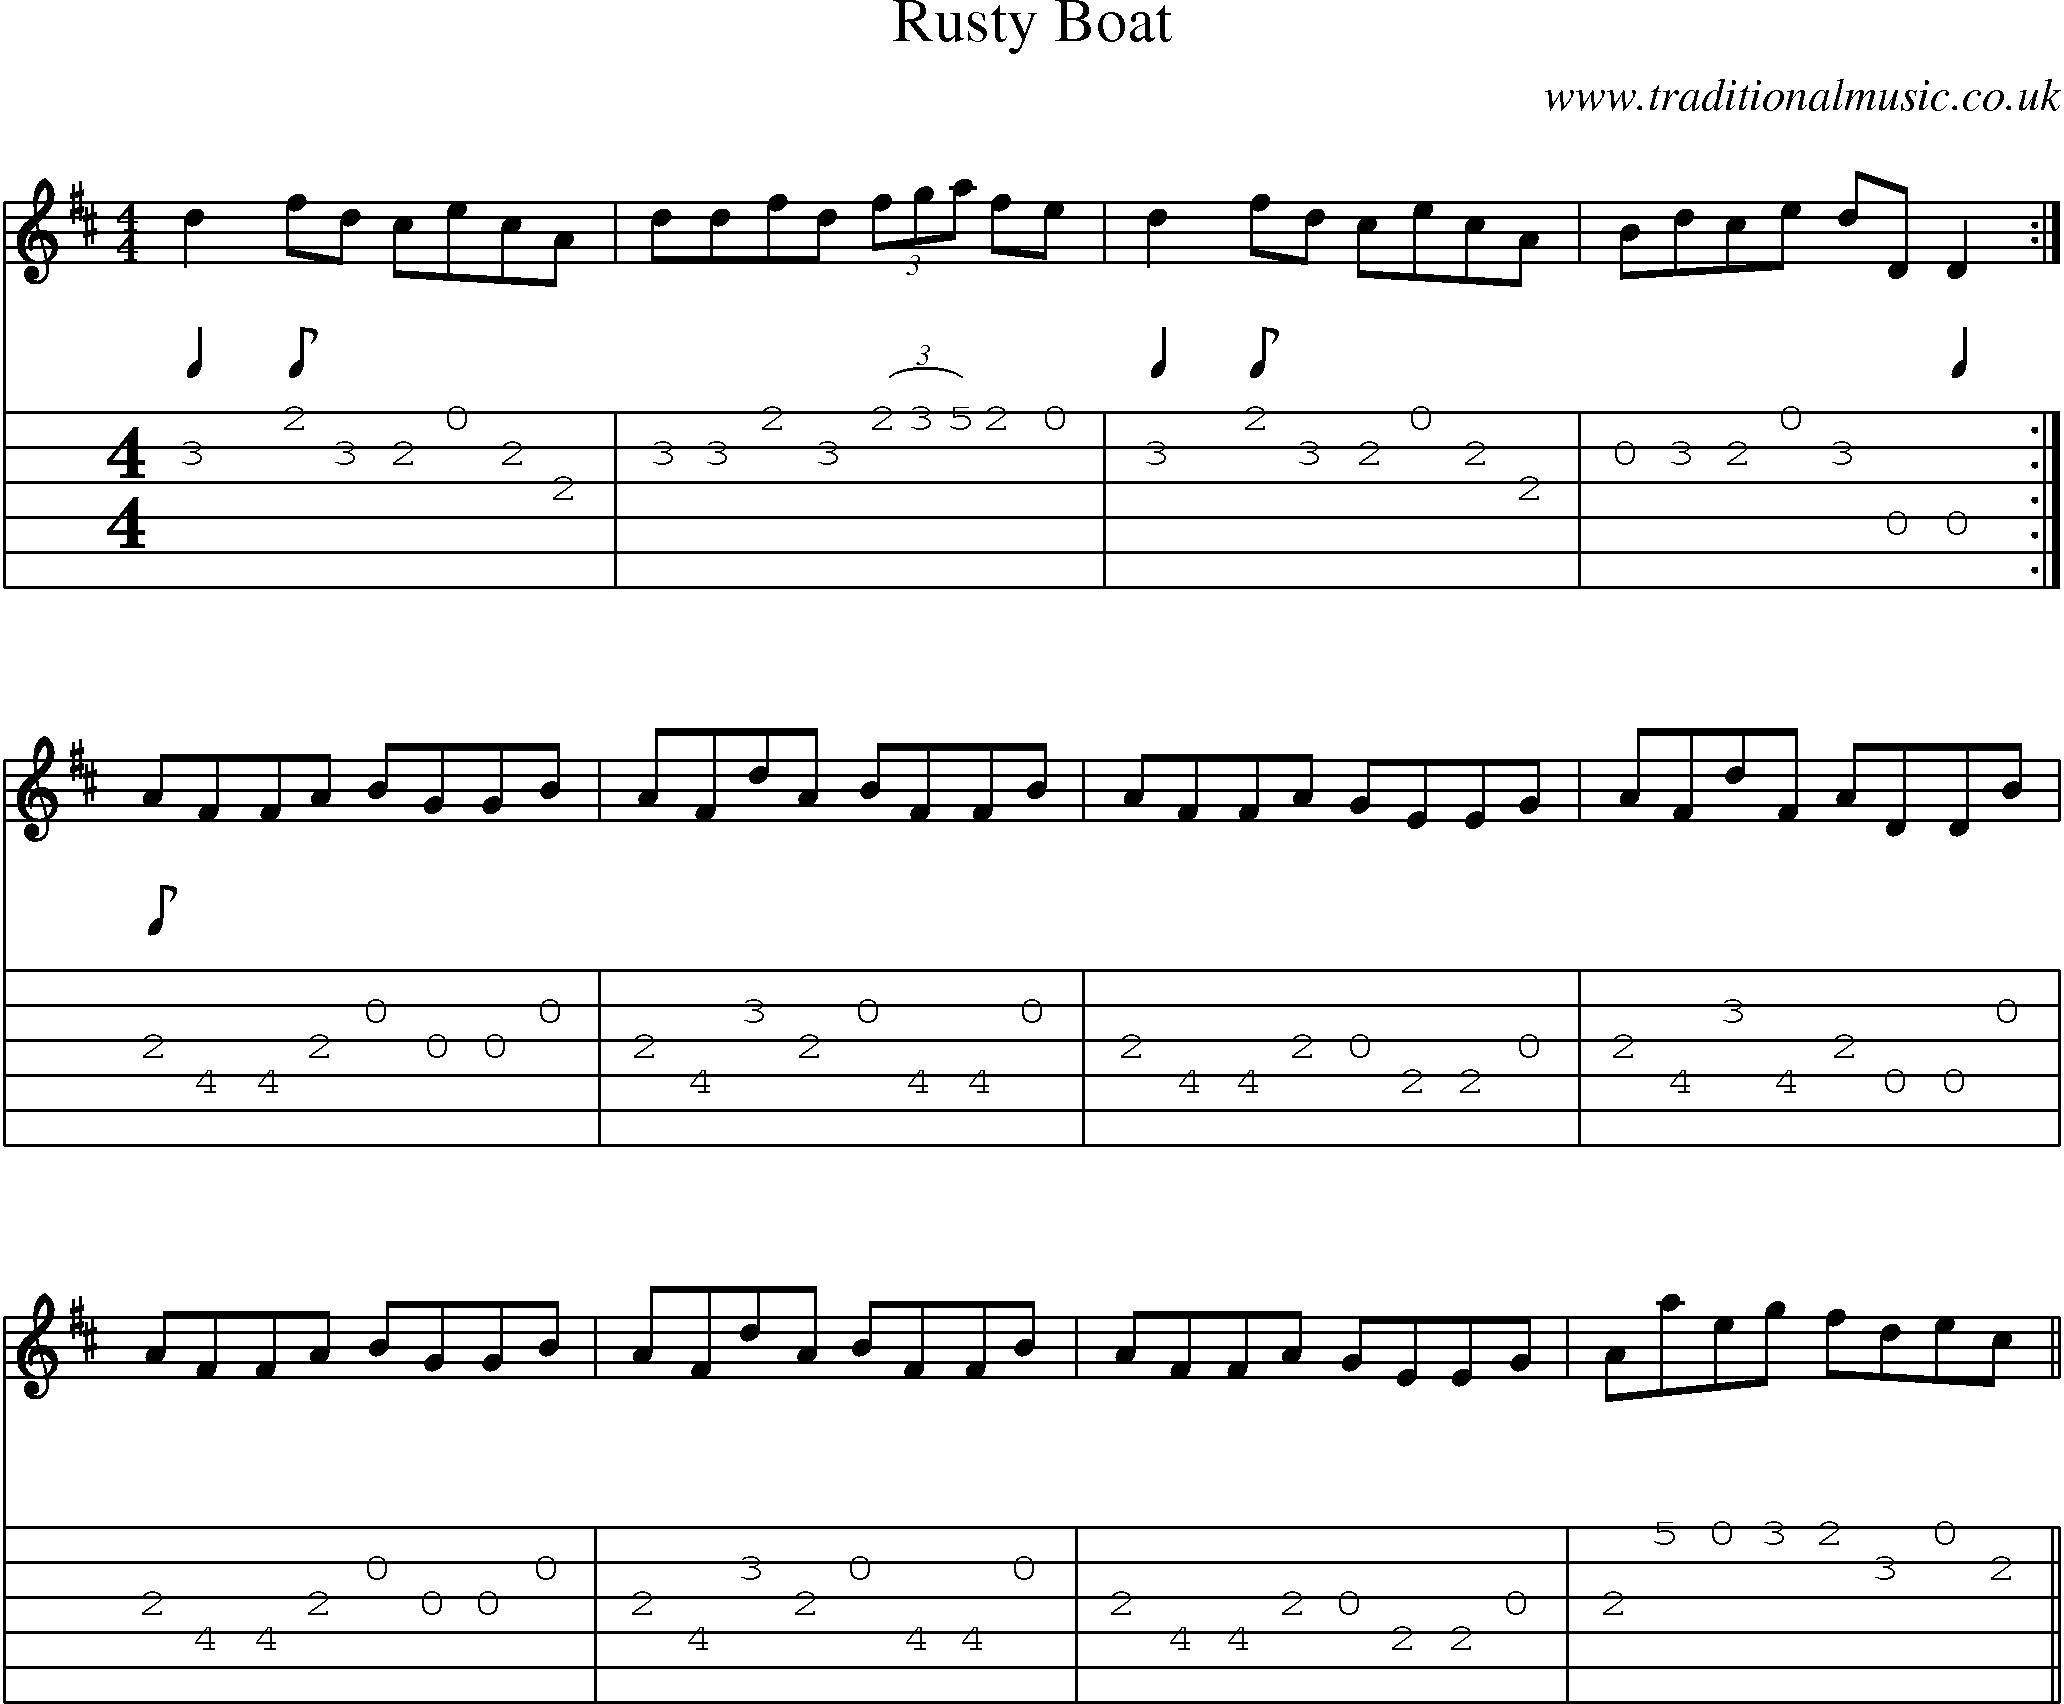 Music Score and Guitar Tabs for Rusty Boat